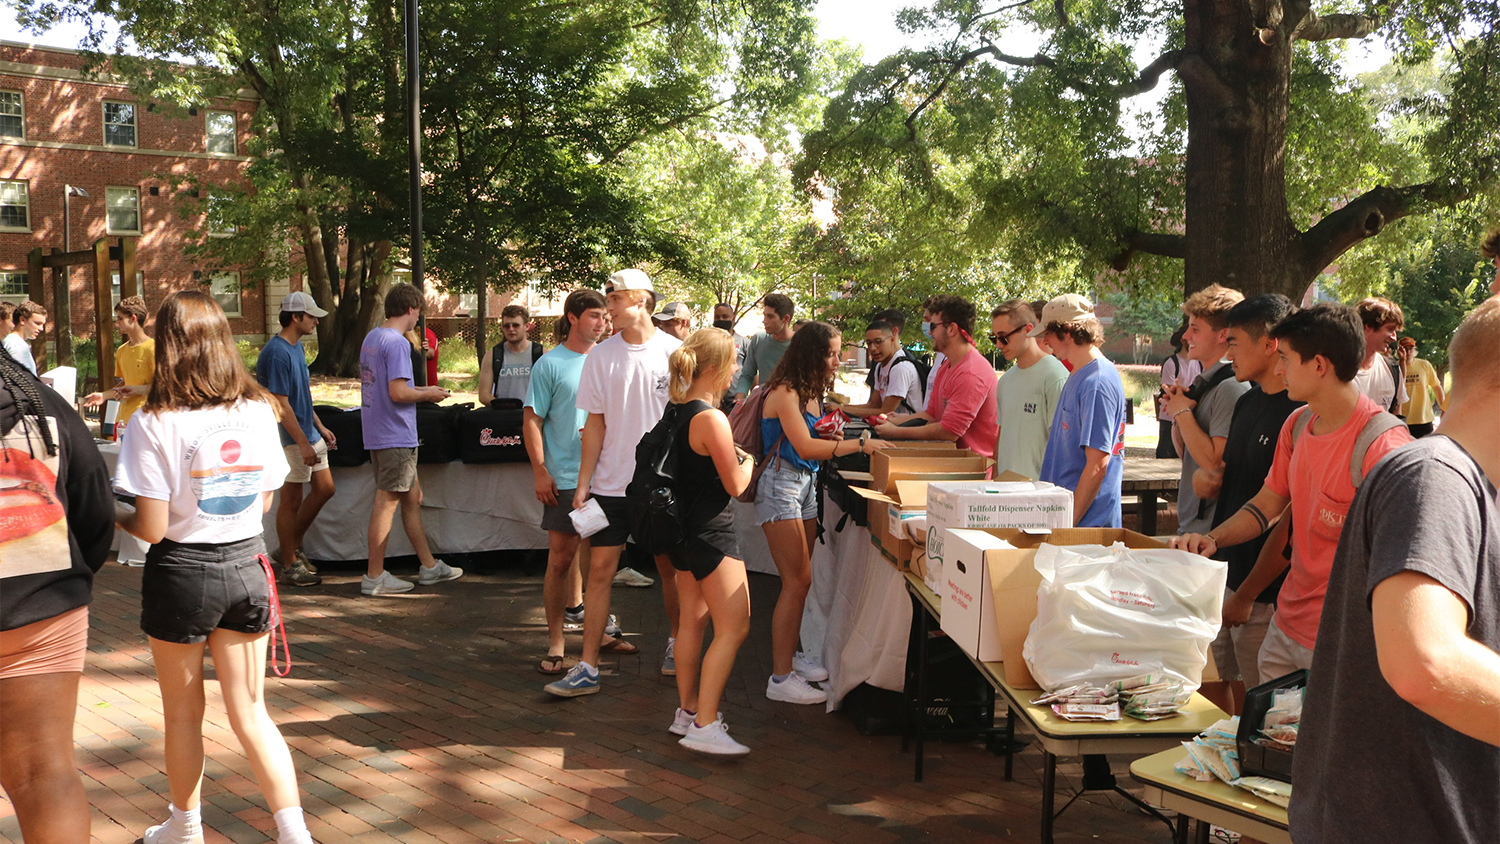 Students wait in line for food at tables during a Grillin and Chillin event